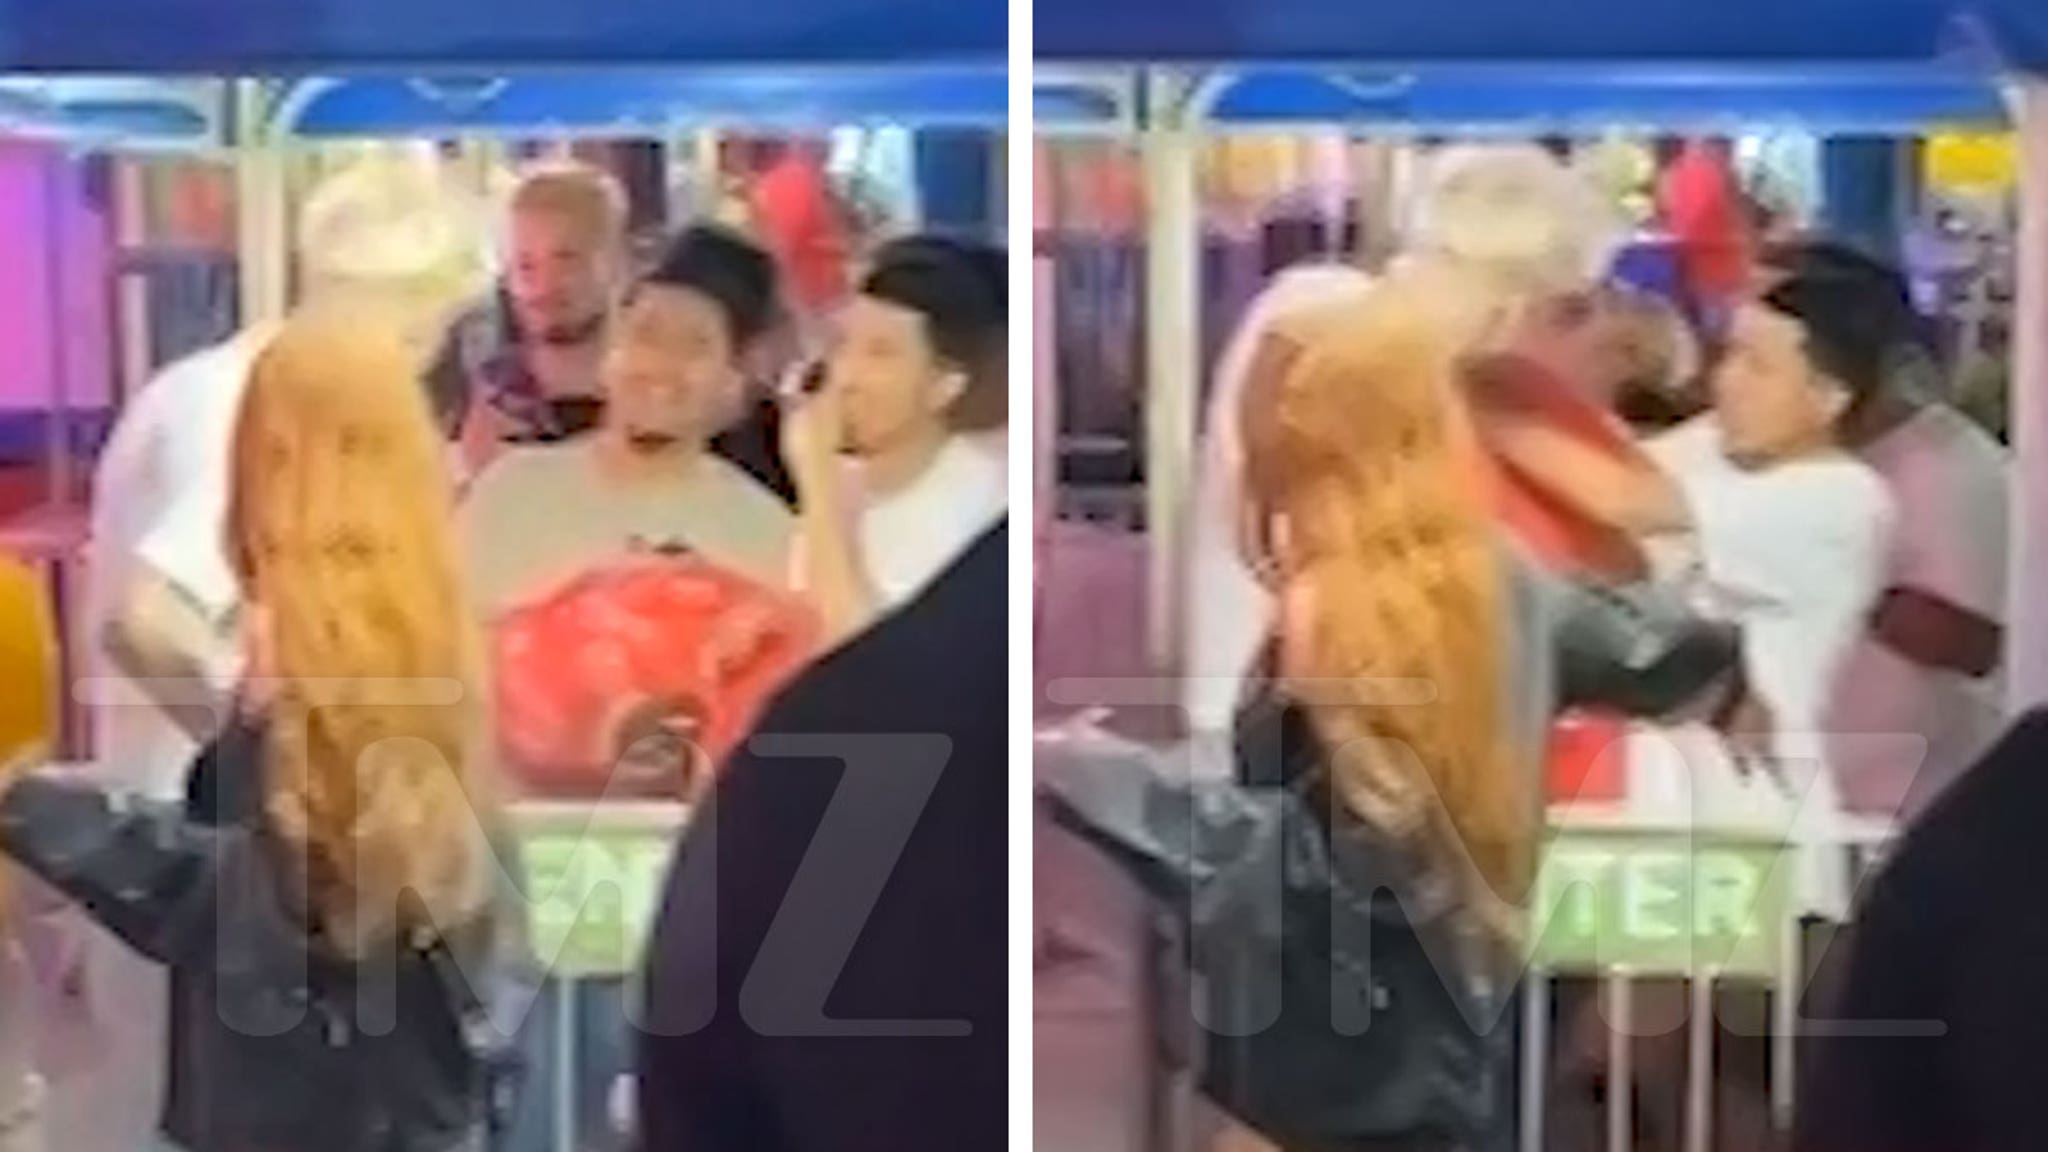 New video shows MGK throwing first punch in OC Fair altercation